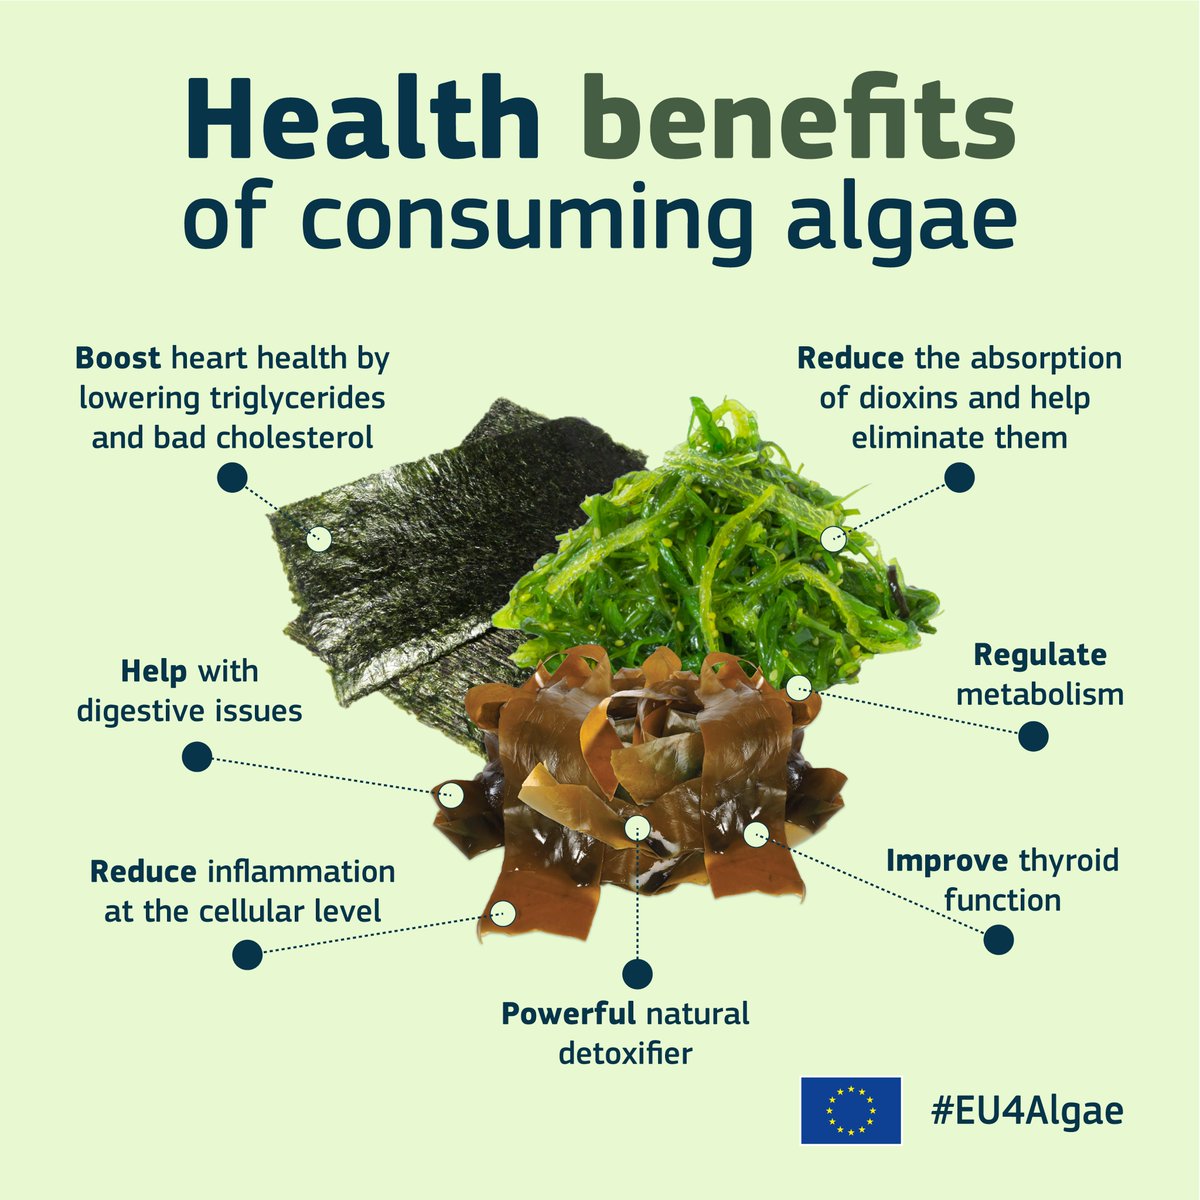 Improve your health with nature’s superfood! 🌱 From reducing inflammation to helping digestion, #algae offer many benefits to support your well-being. Find out more below 👇 #EU4Algae #EU #EMFAF